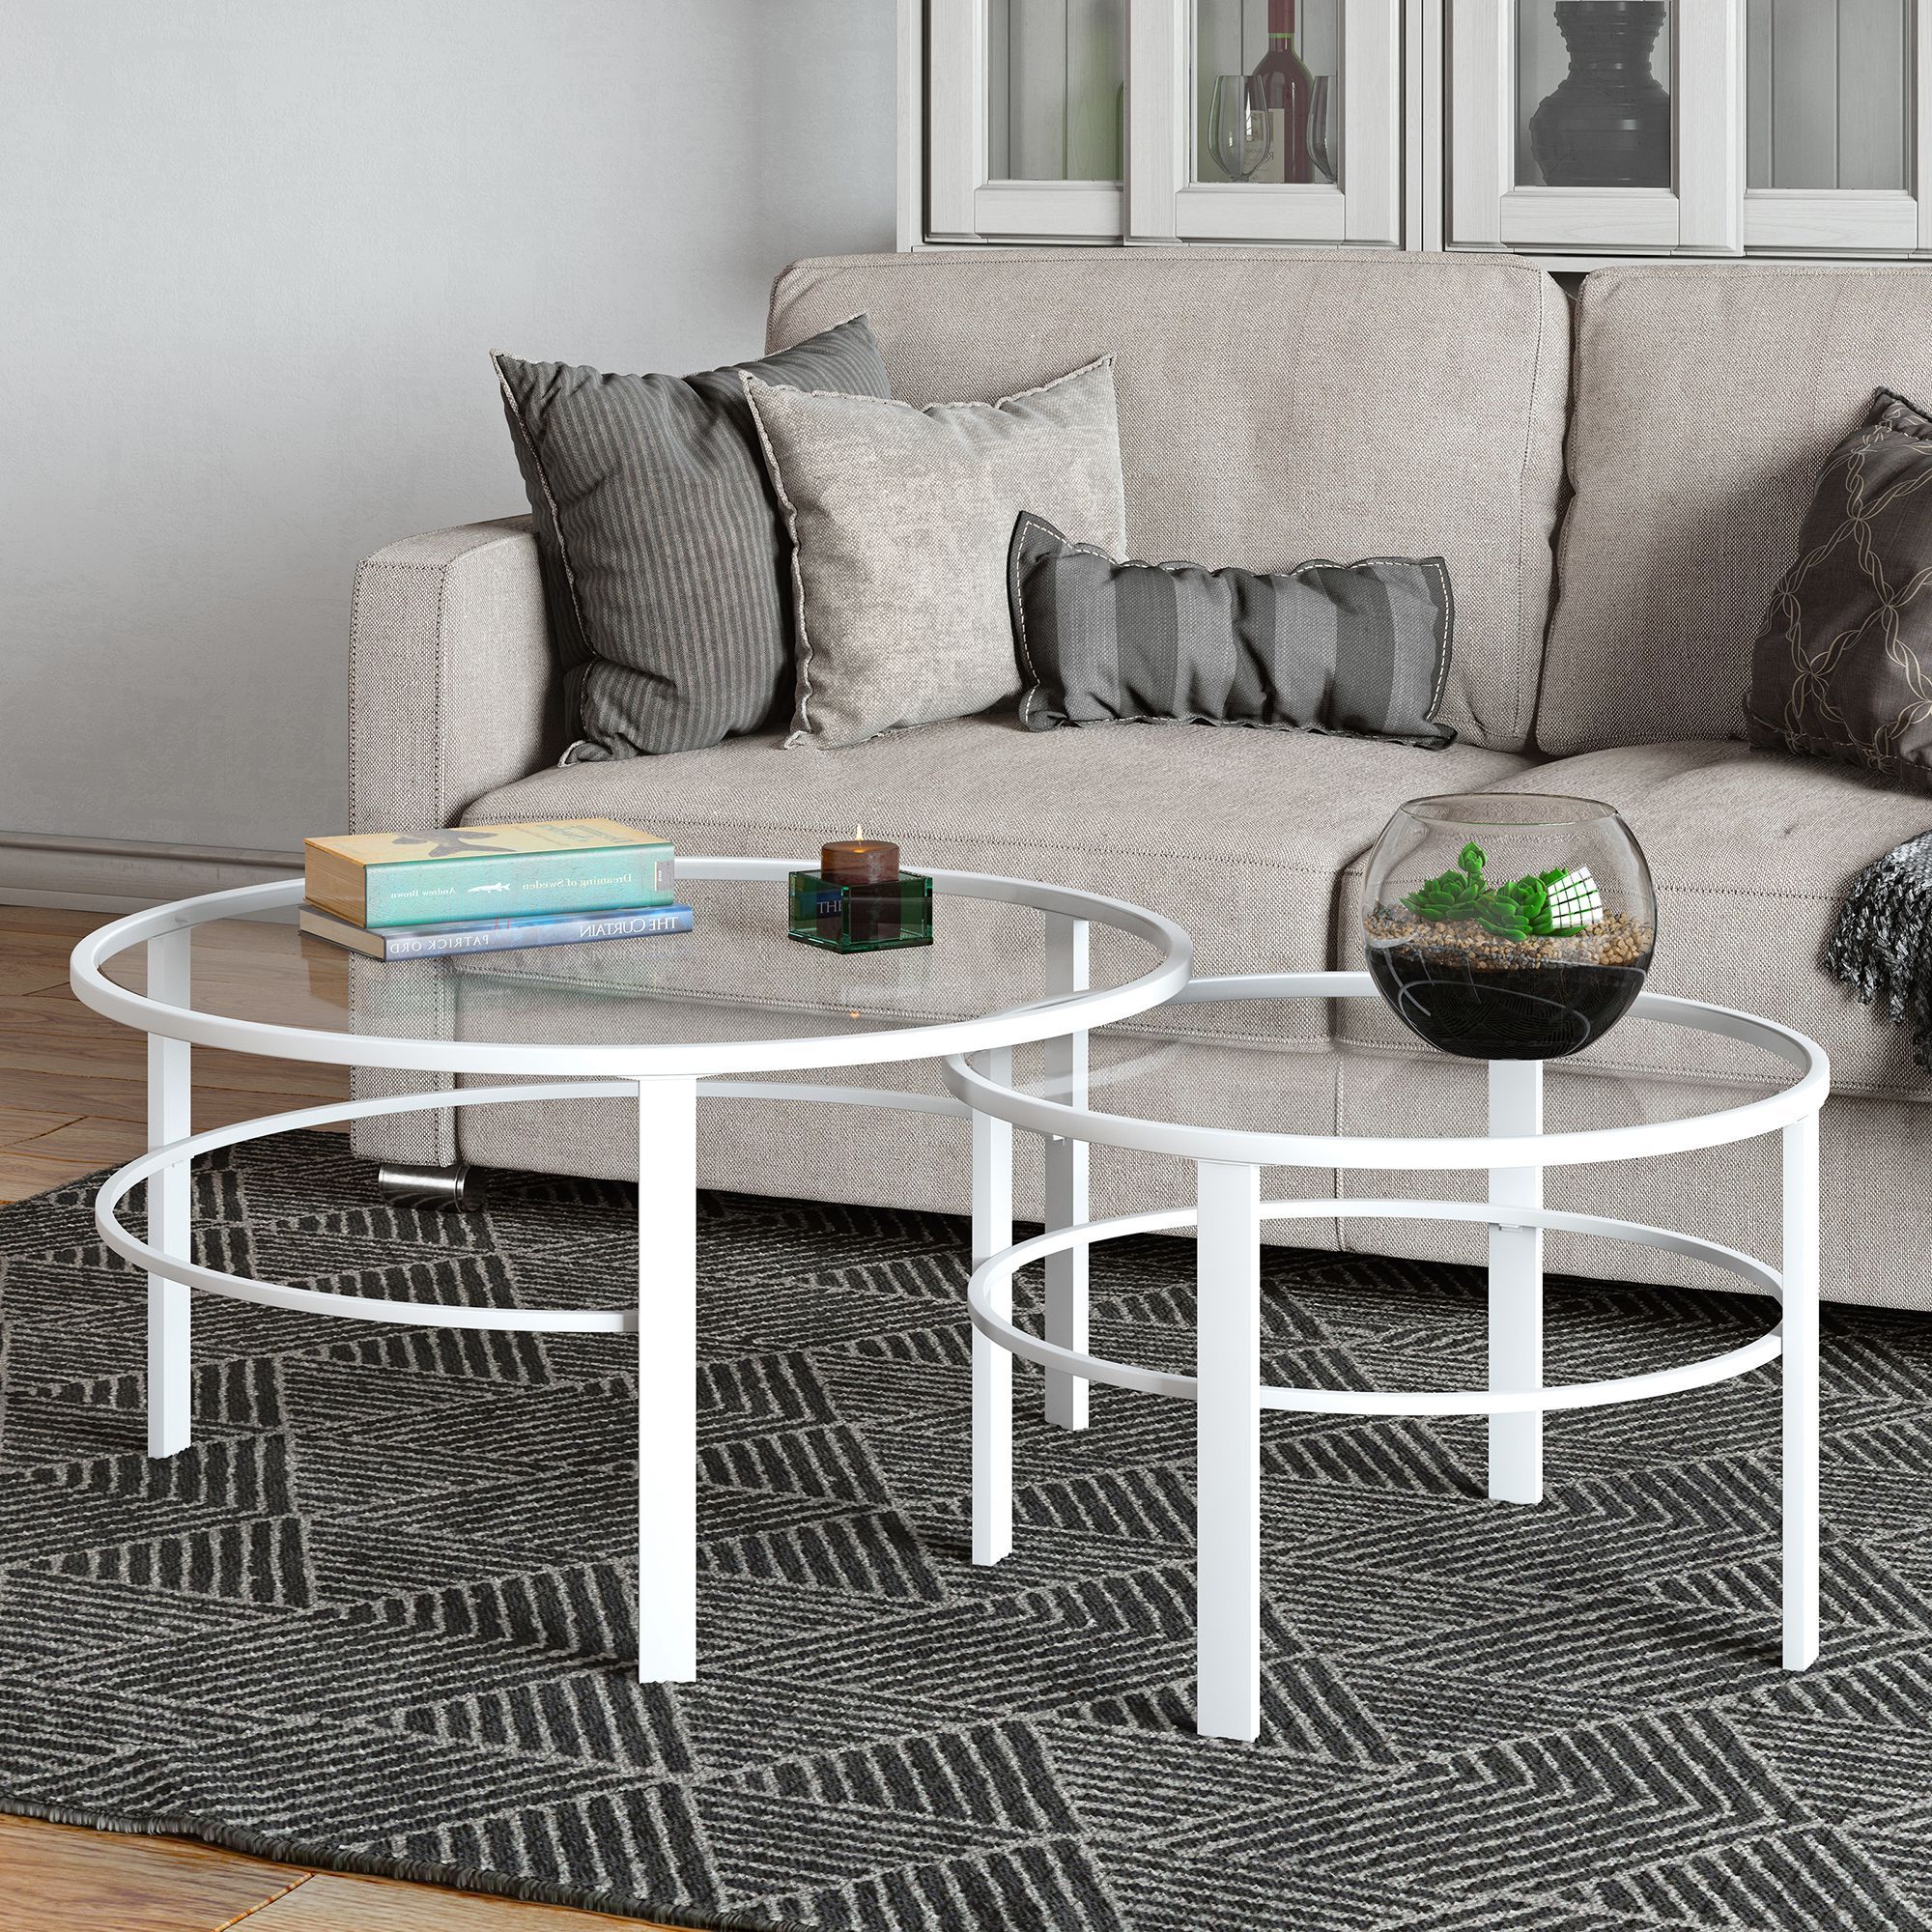 Best And Newest Evelyn&zoe Contemporary Nesting Coffee Table Set With With Regard To Geometric Glass Modern Coffee Tables (View 1 of 20)